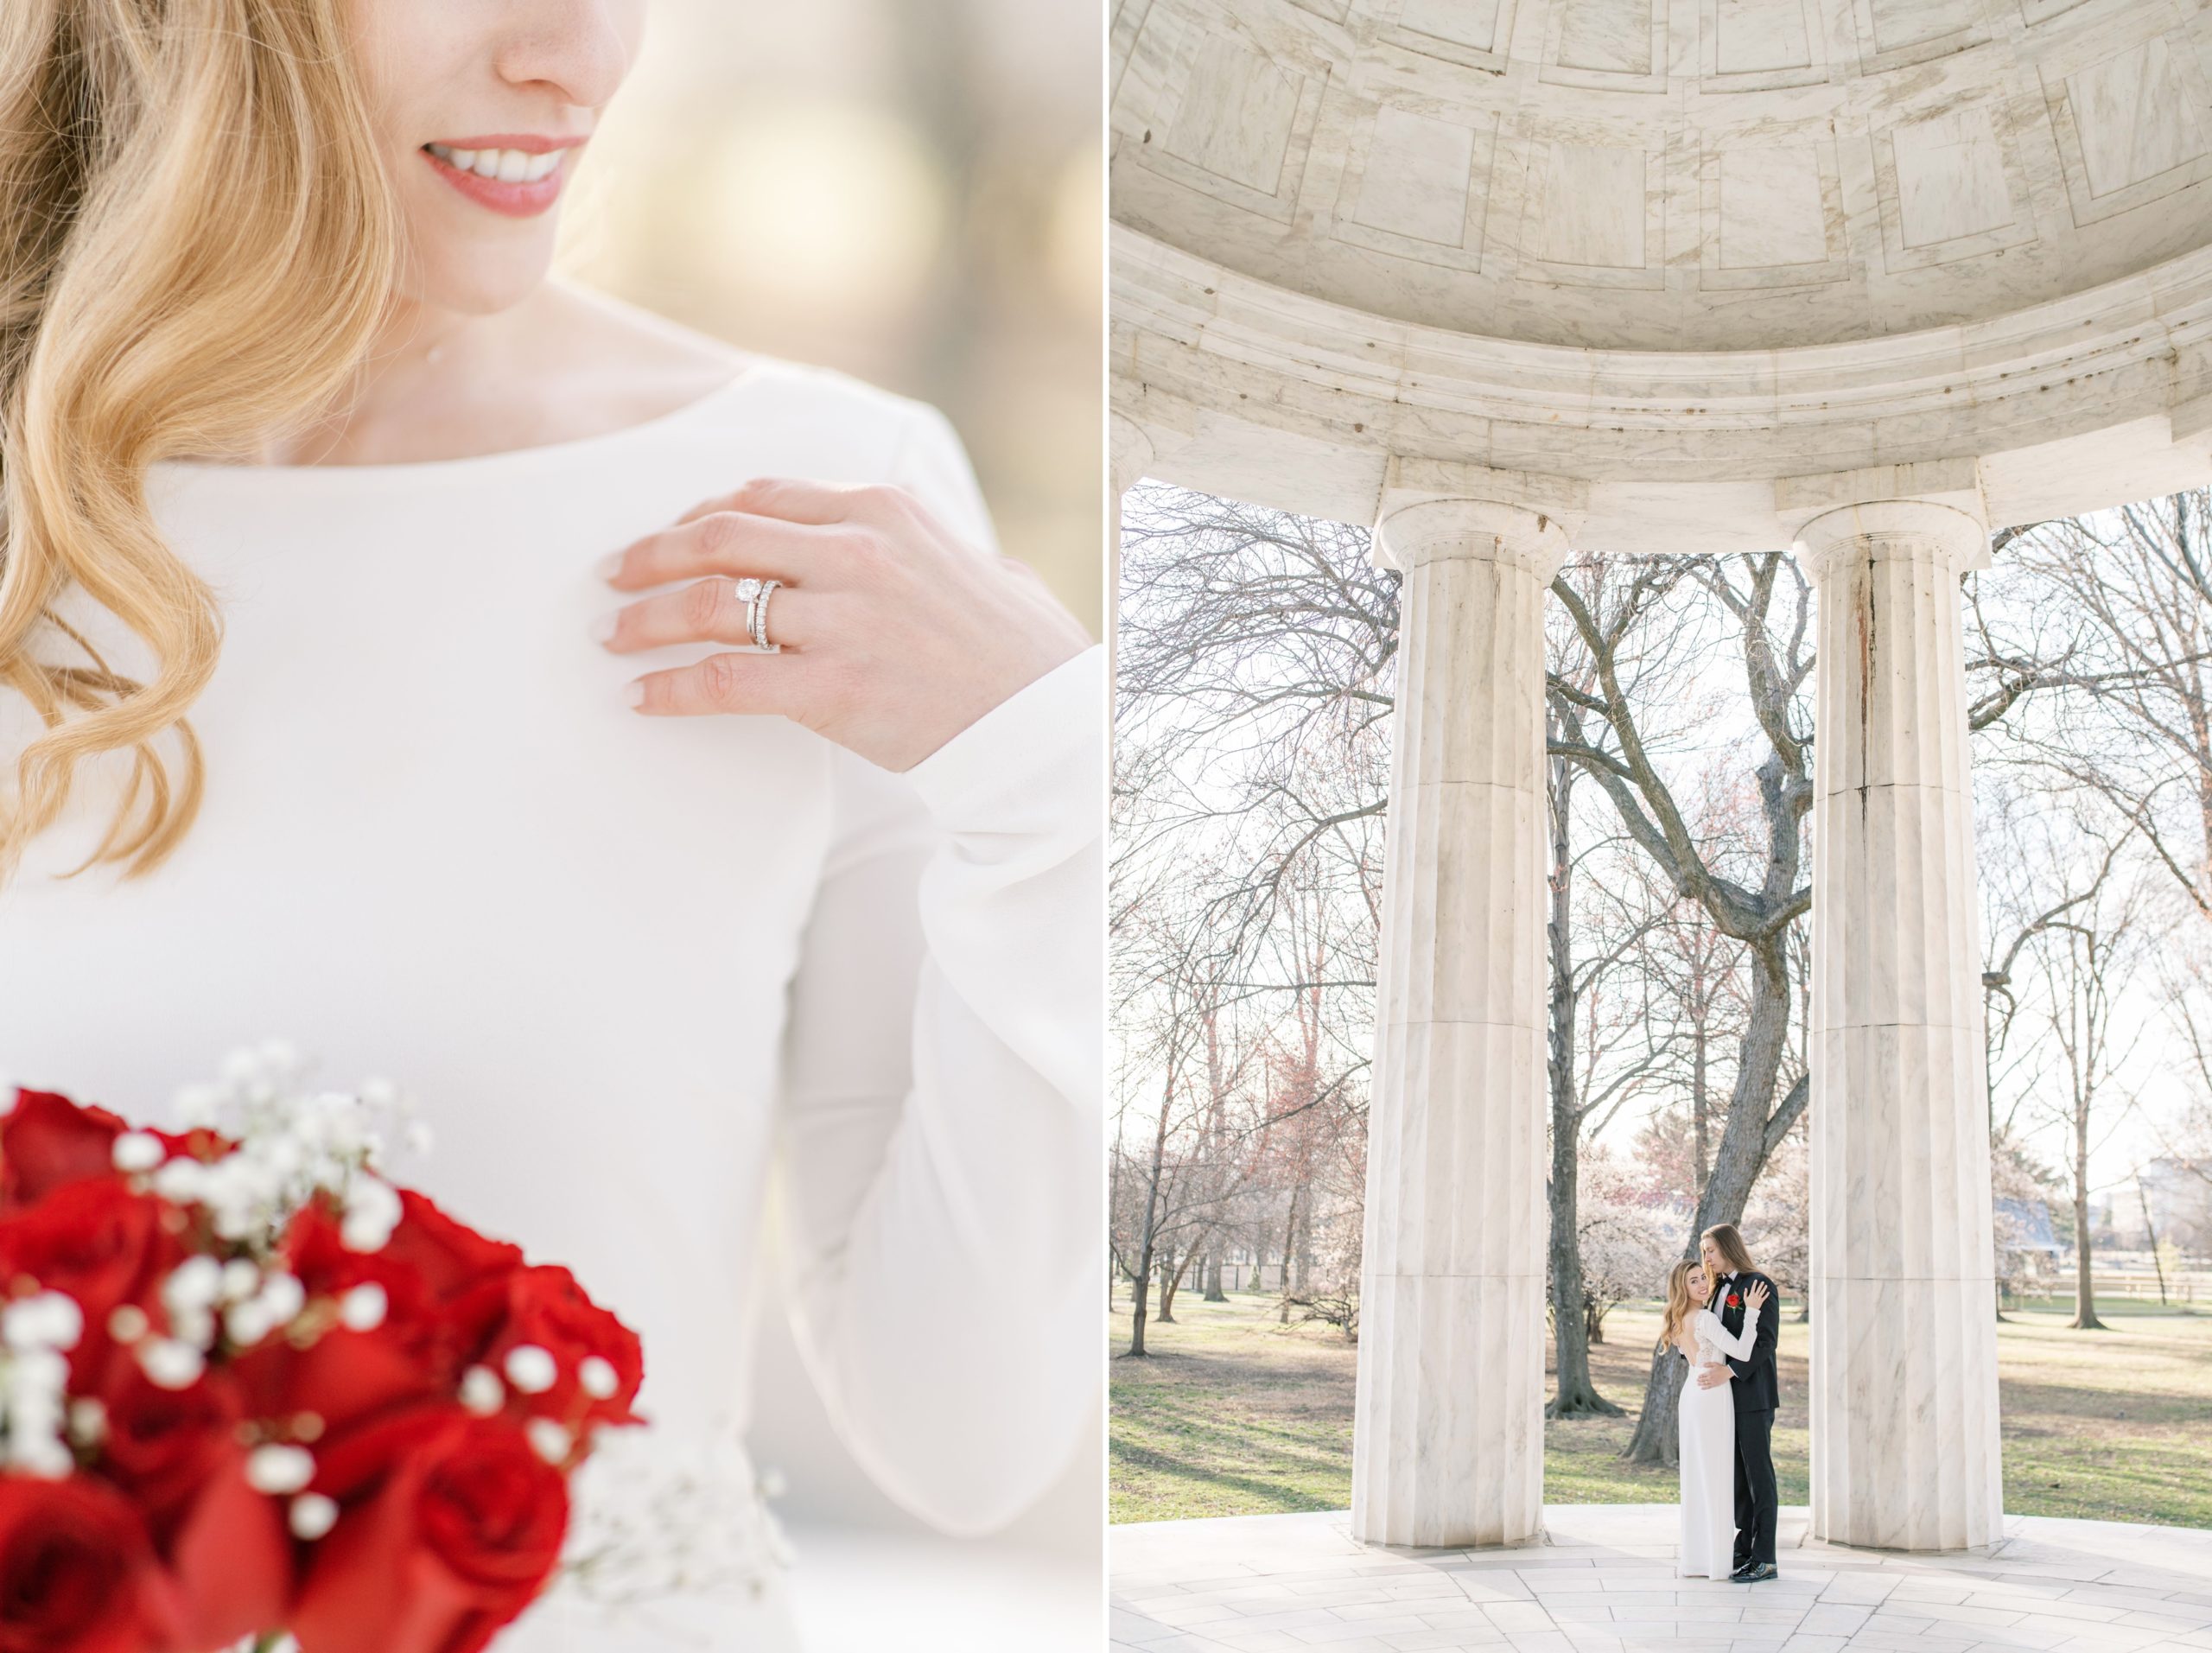 A romantic elopement at the DC War Memorial in Washington, DC on Valentine's Day.